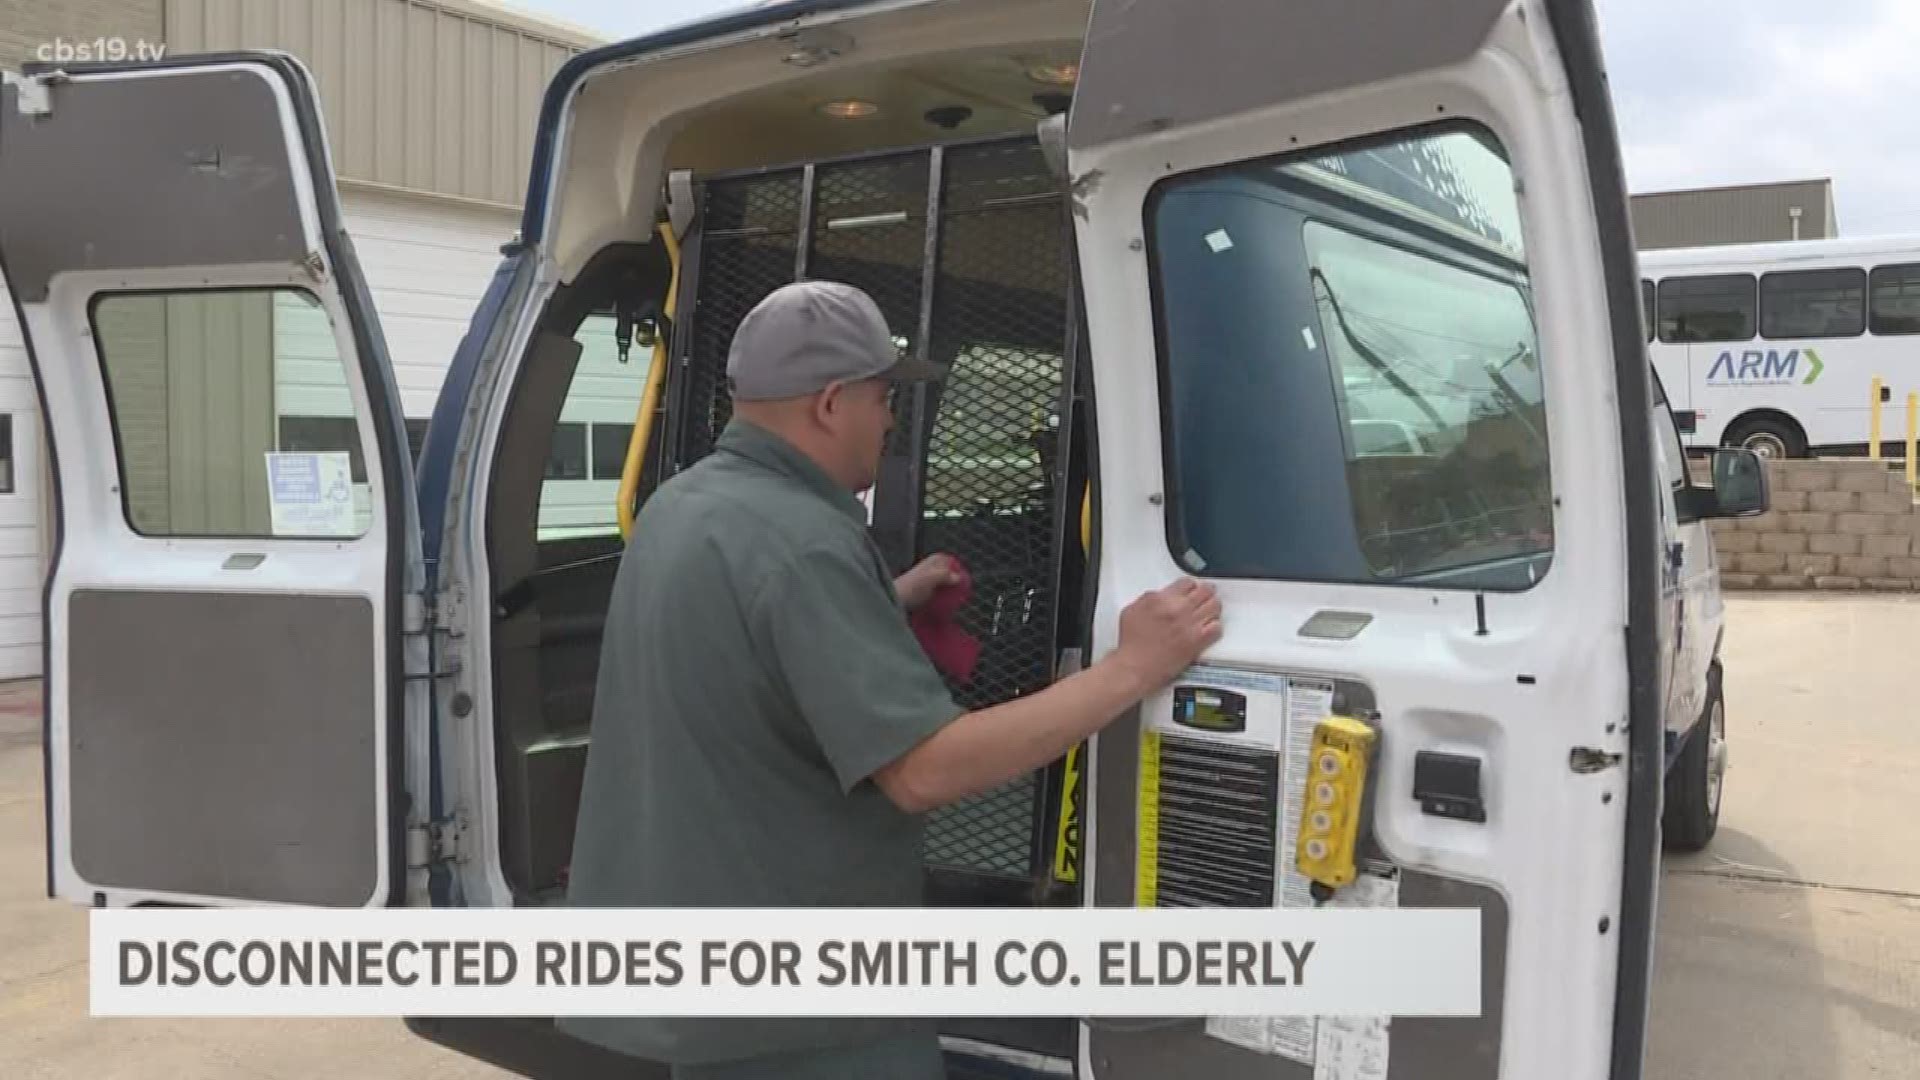 Smith County is reapplying for federal funds to continue the 5310 voucher program, which provides 24/7 transportation to the elderly and disabled.